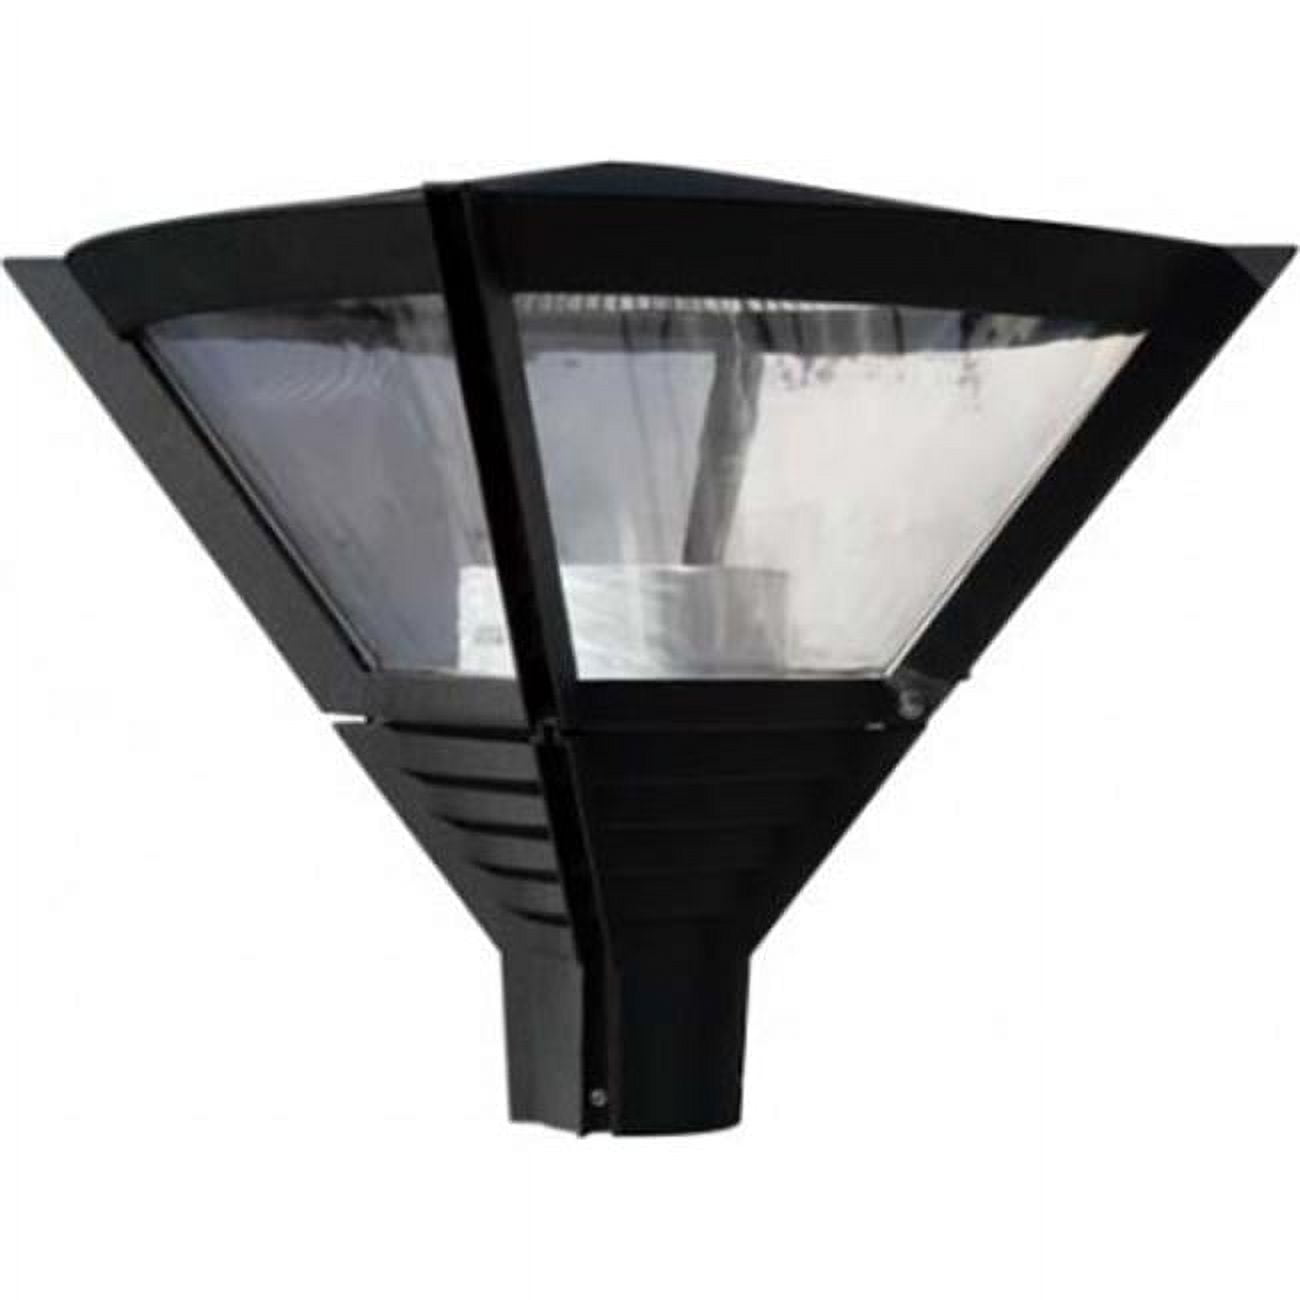 Picture of Dabmar Lighting GM564-B Powder Coated Cast Aluminum Architectural Post Top Light Fixture, Black - 20.75 x 20.75 x 20.75 in.